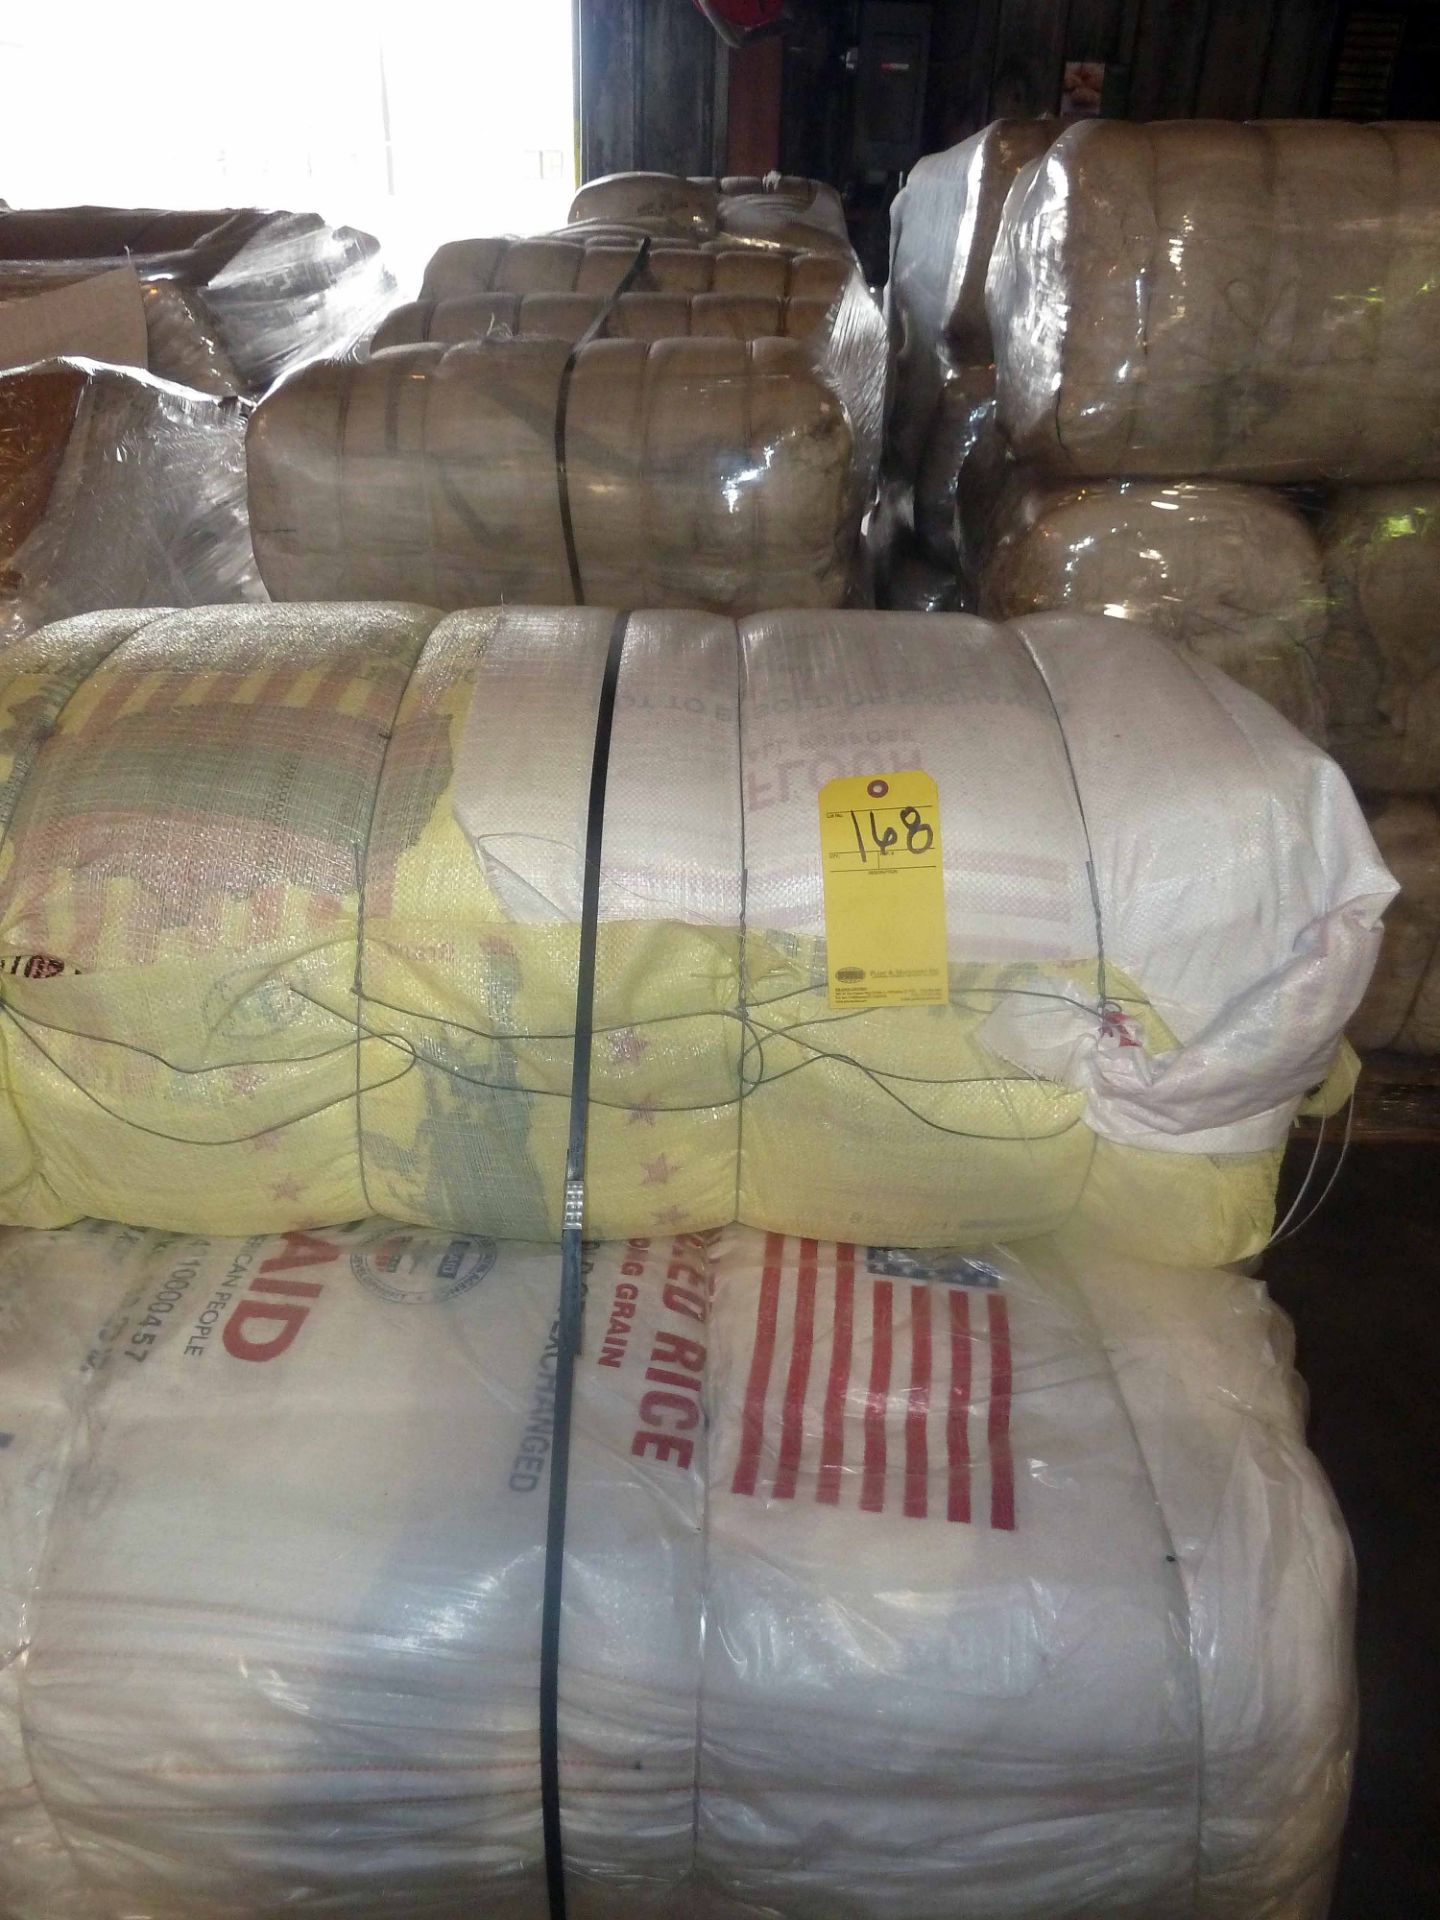 LOT OF PALLETIZED WOVEN BAGS, APPROX. 3,000 BAGS